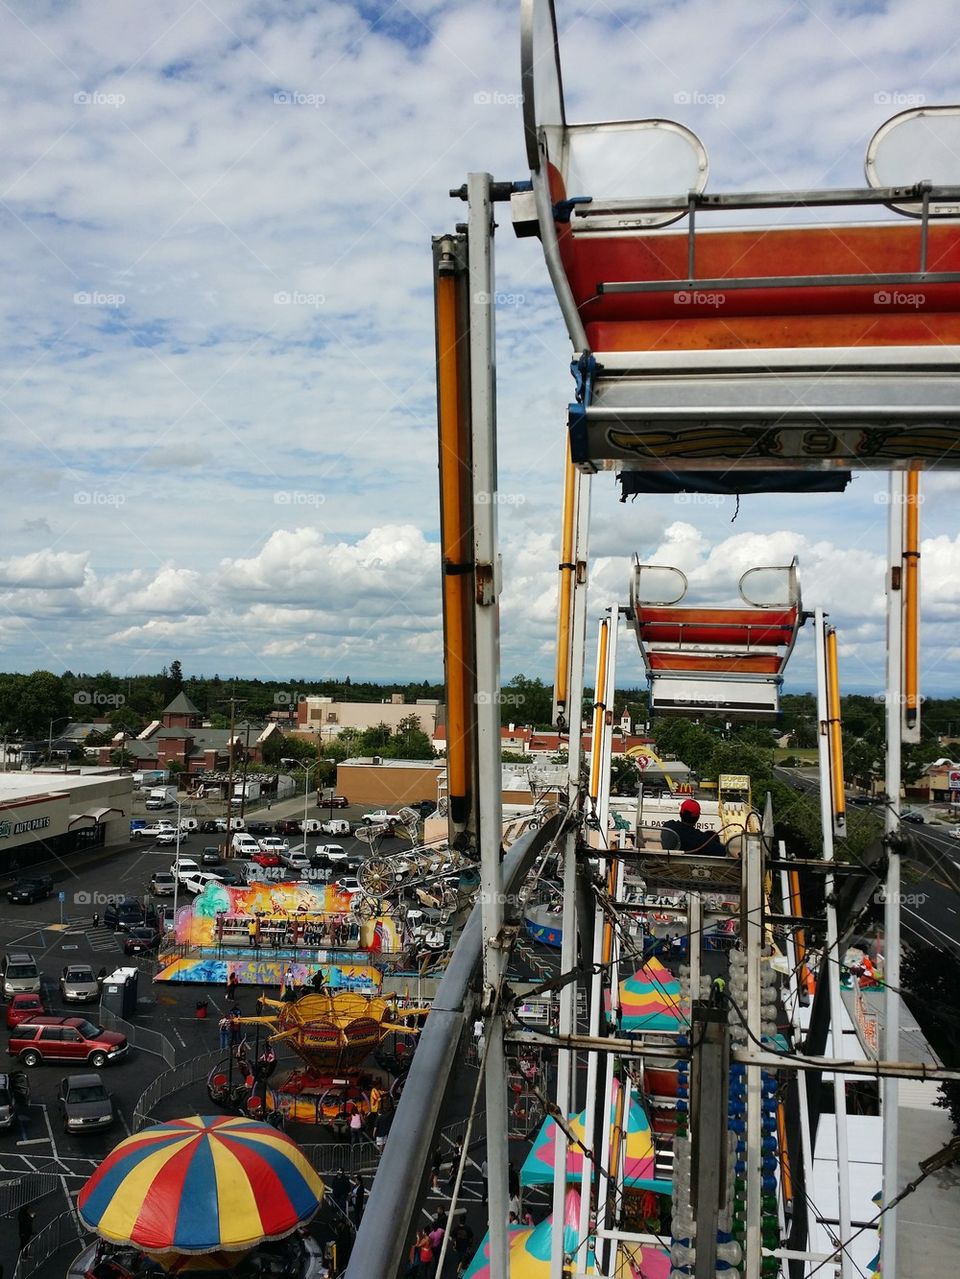 The view from the Ferris Wheel